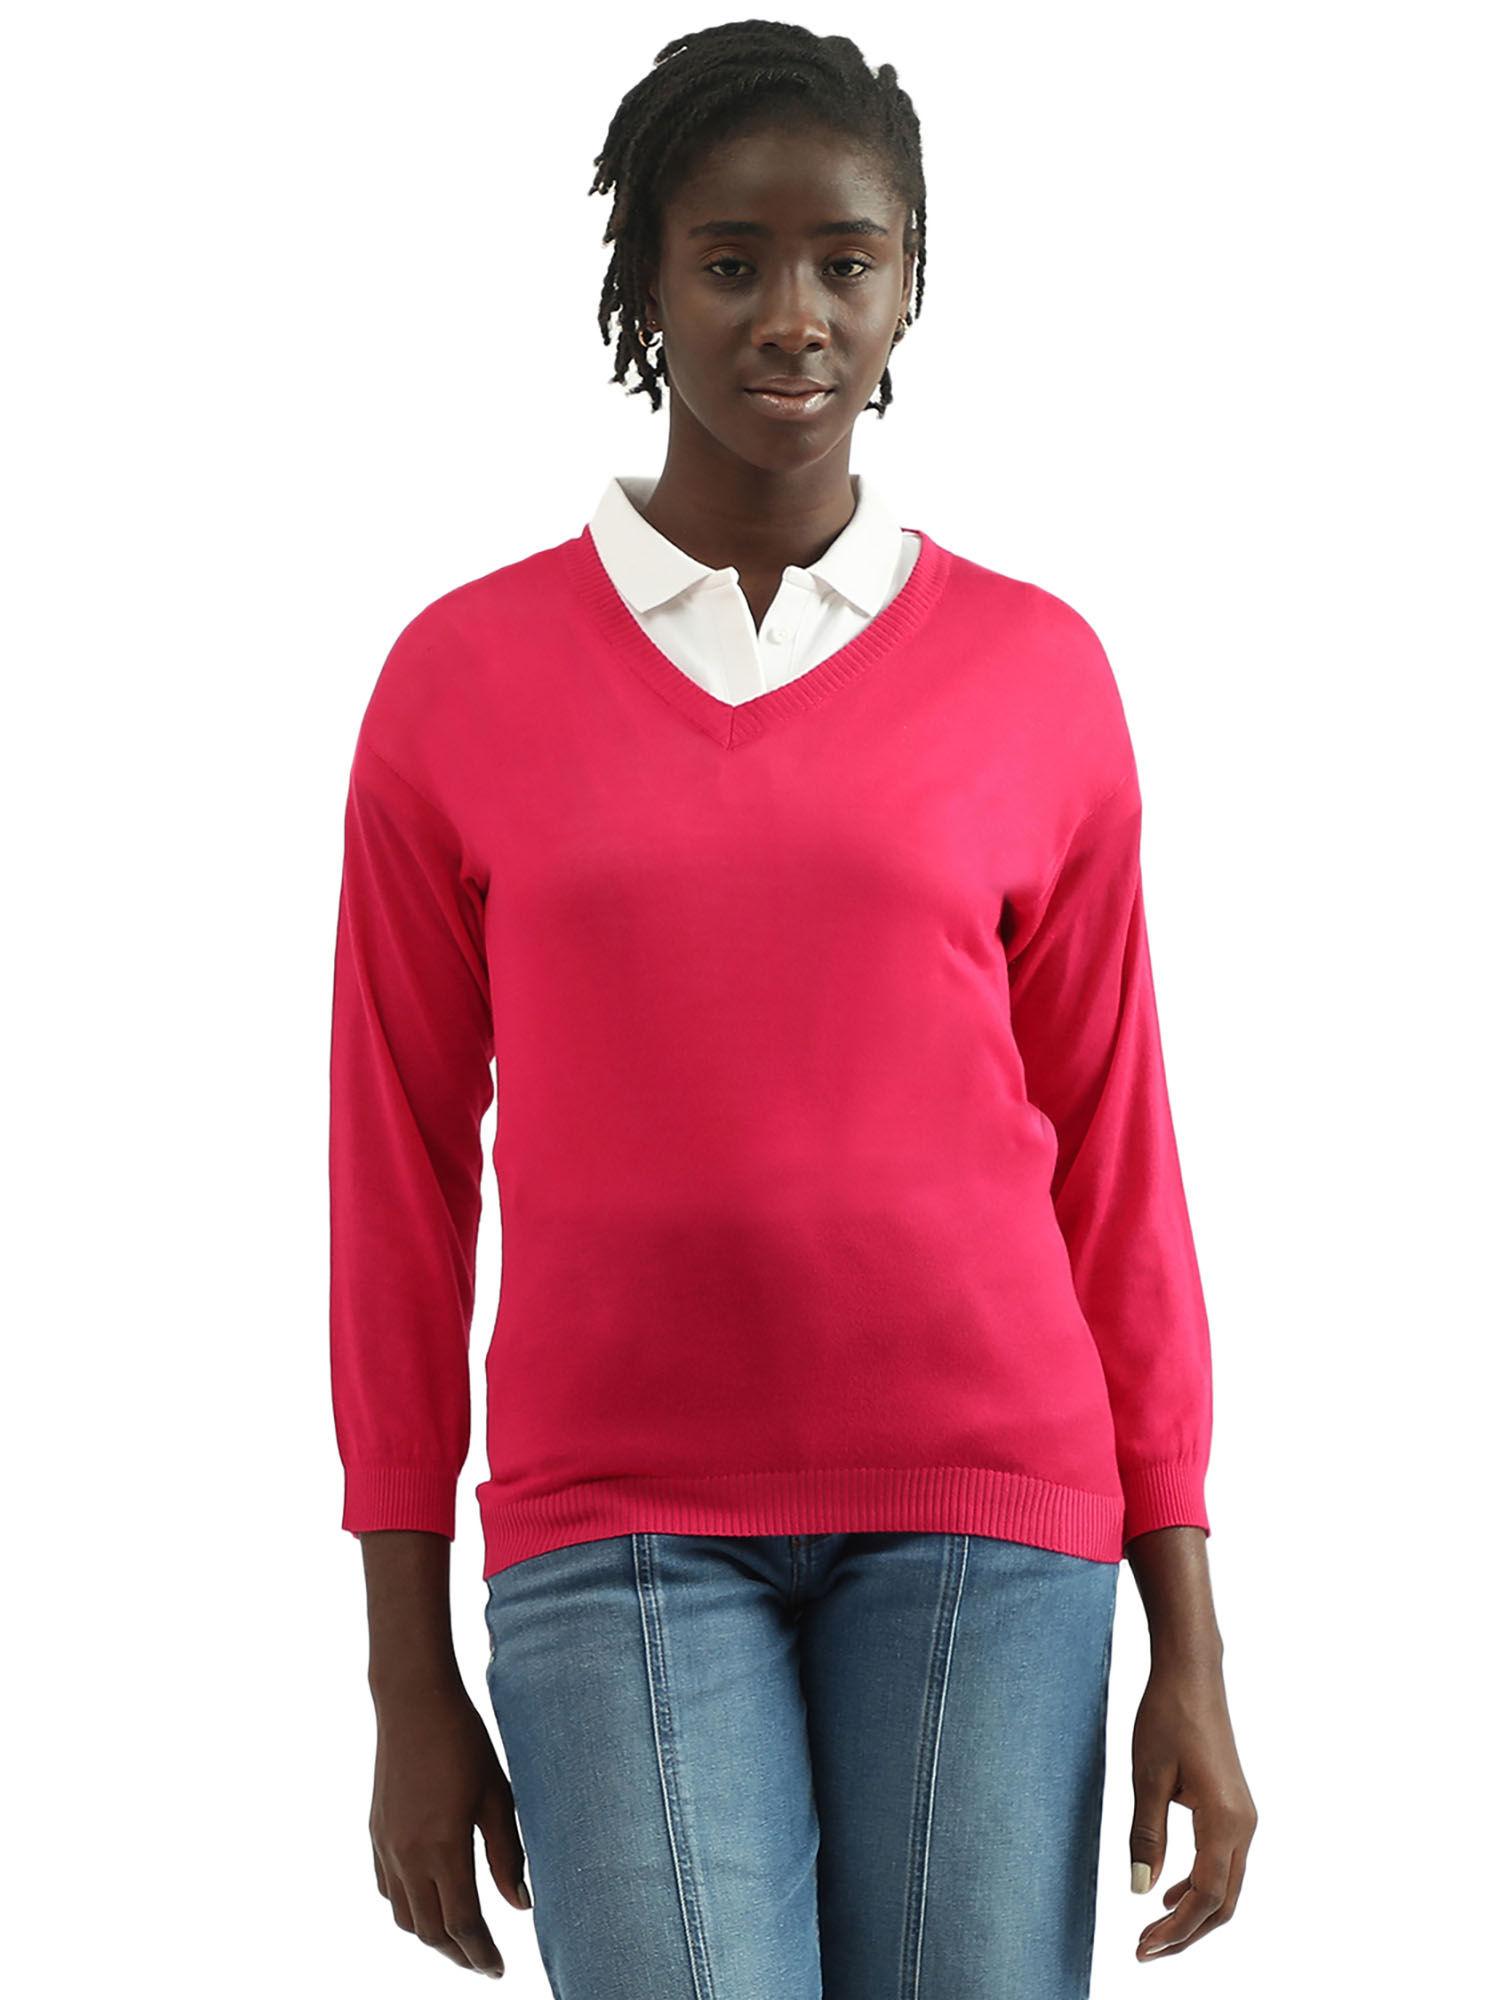 women knitted v-neck red sweater